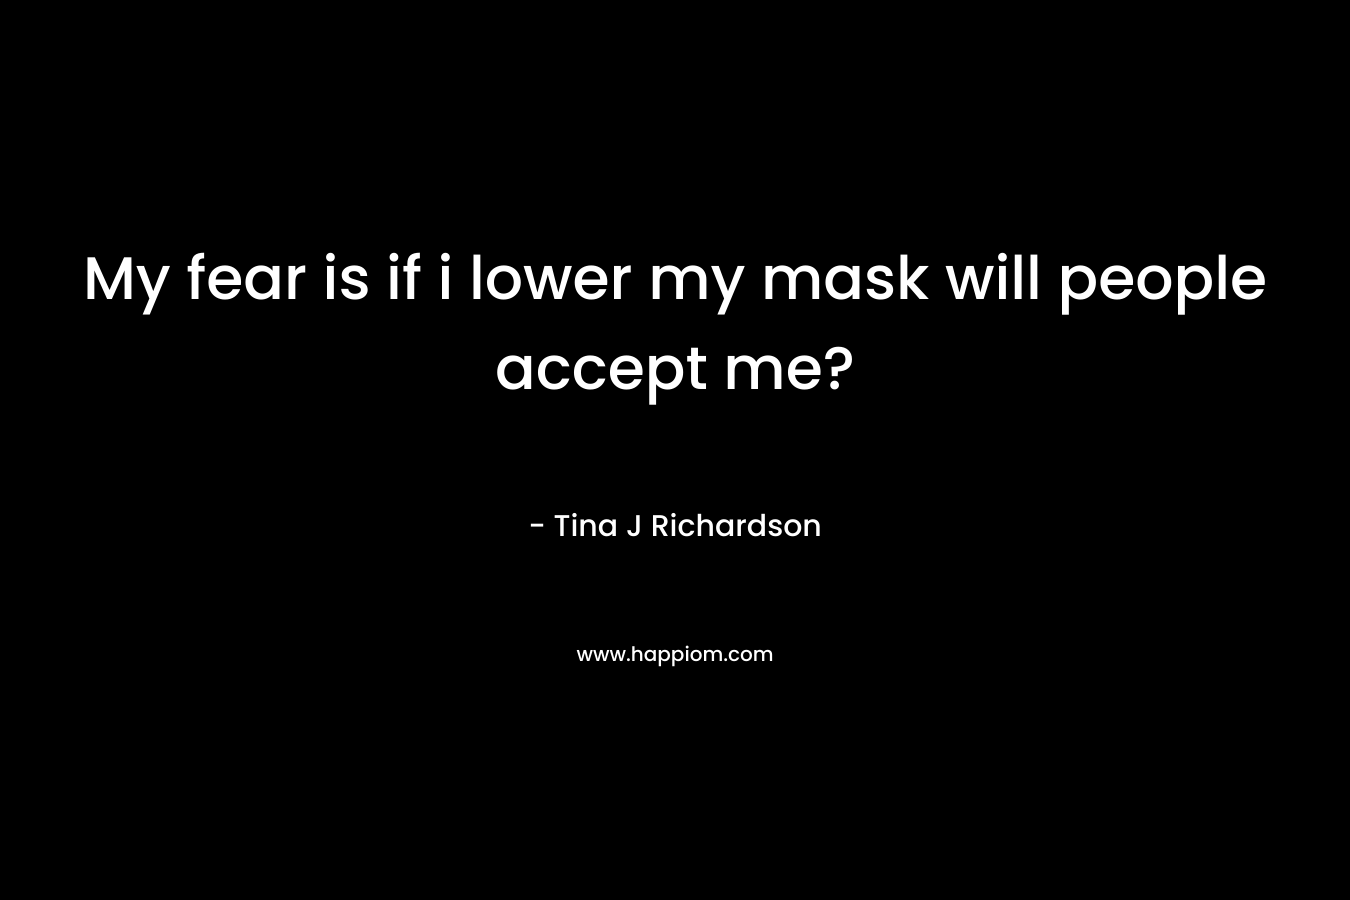 My fear is if i lower my mask will people accept me?